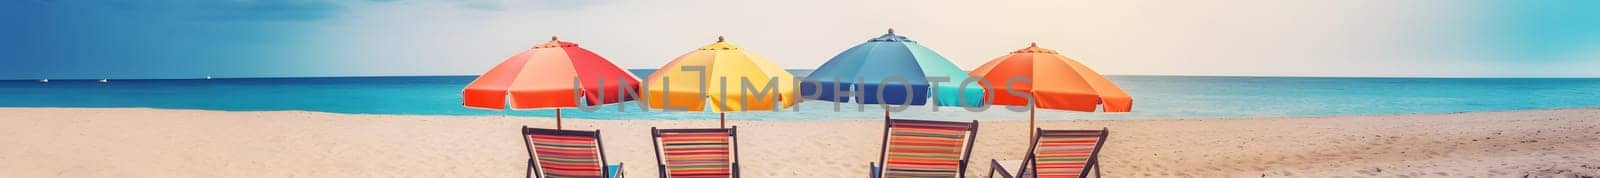 Beach umbrellas with chairs on the sand beach - summer vacation theme header, neural network generated art by z1b